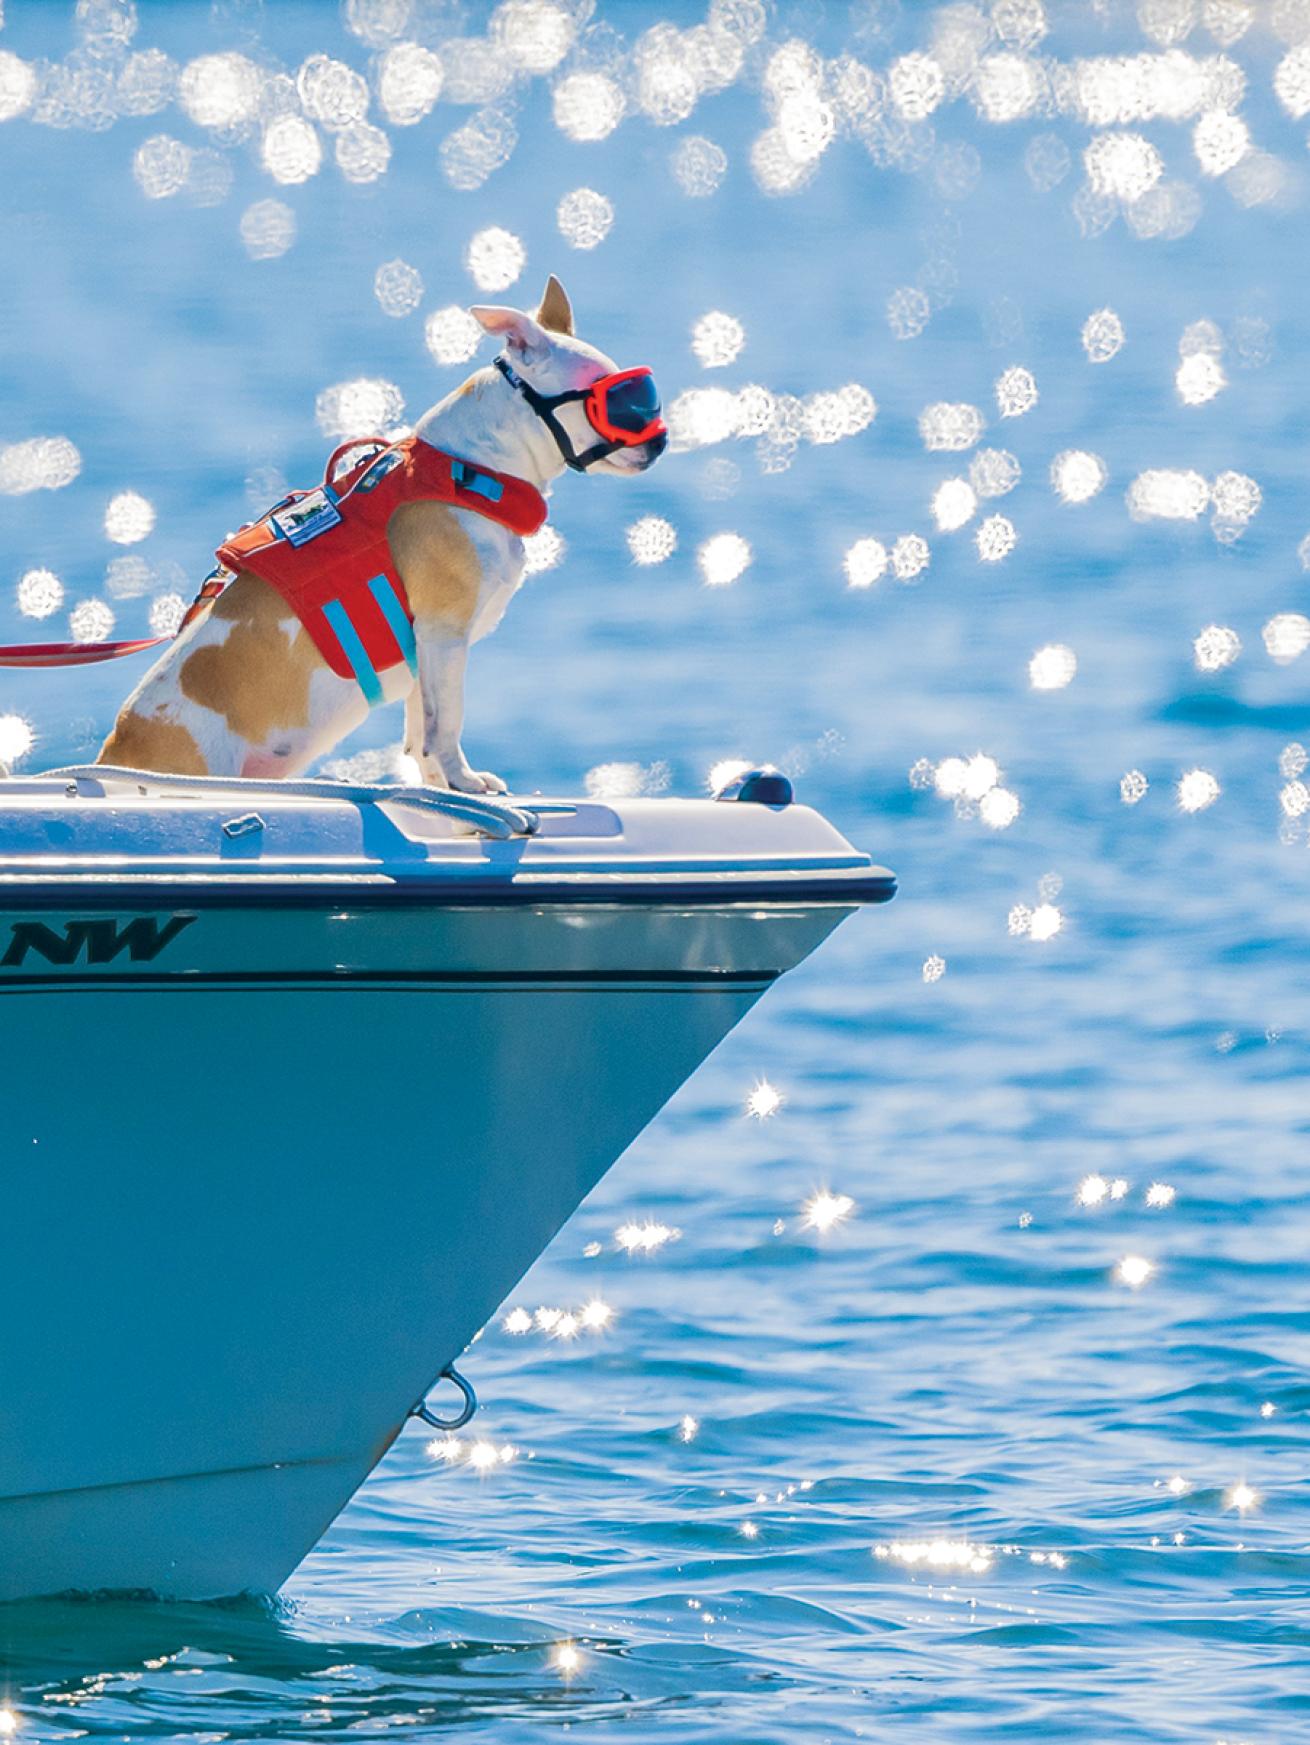 A small dog wearing a life jacket and sunglasses stands on the bow of the boat in the water on a sunny day.